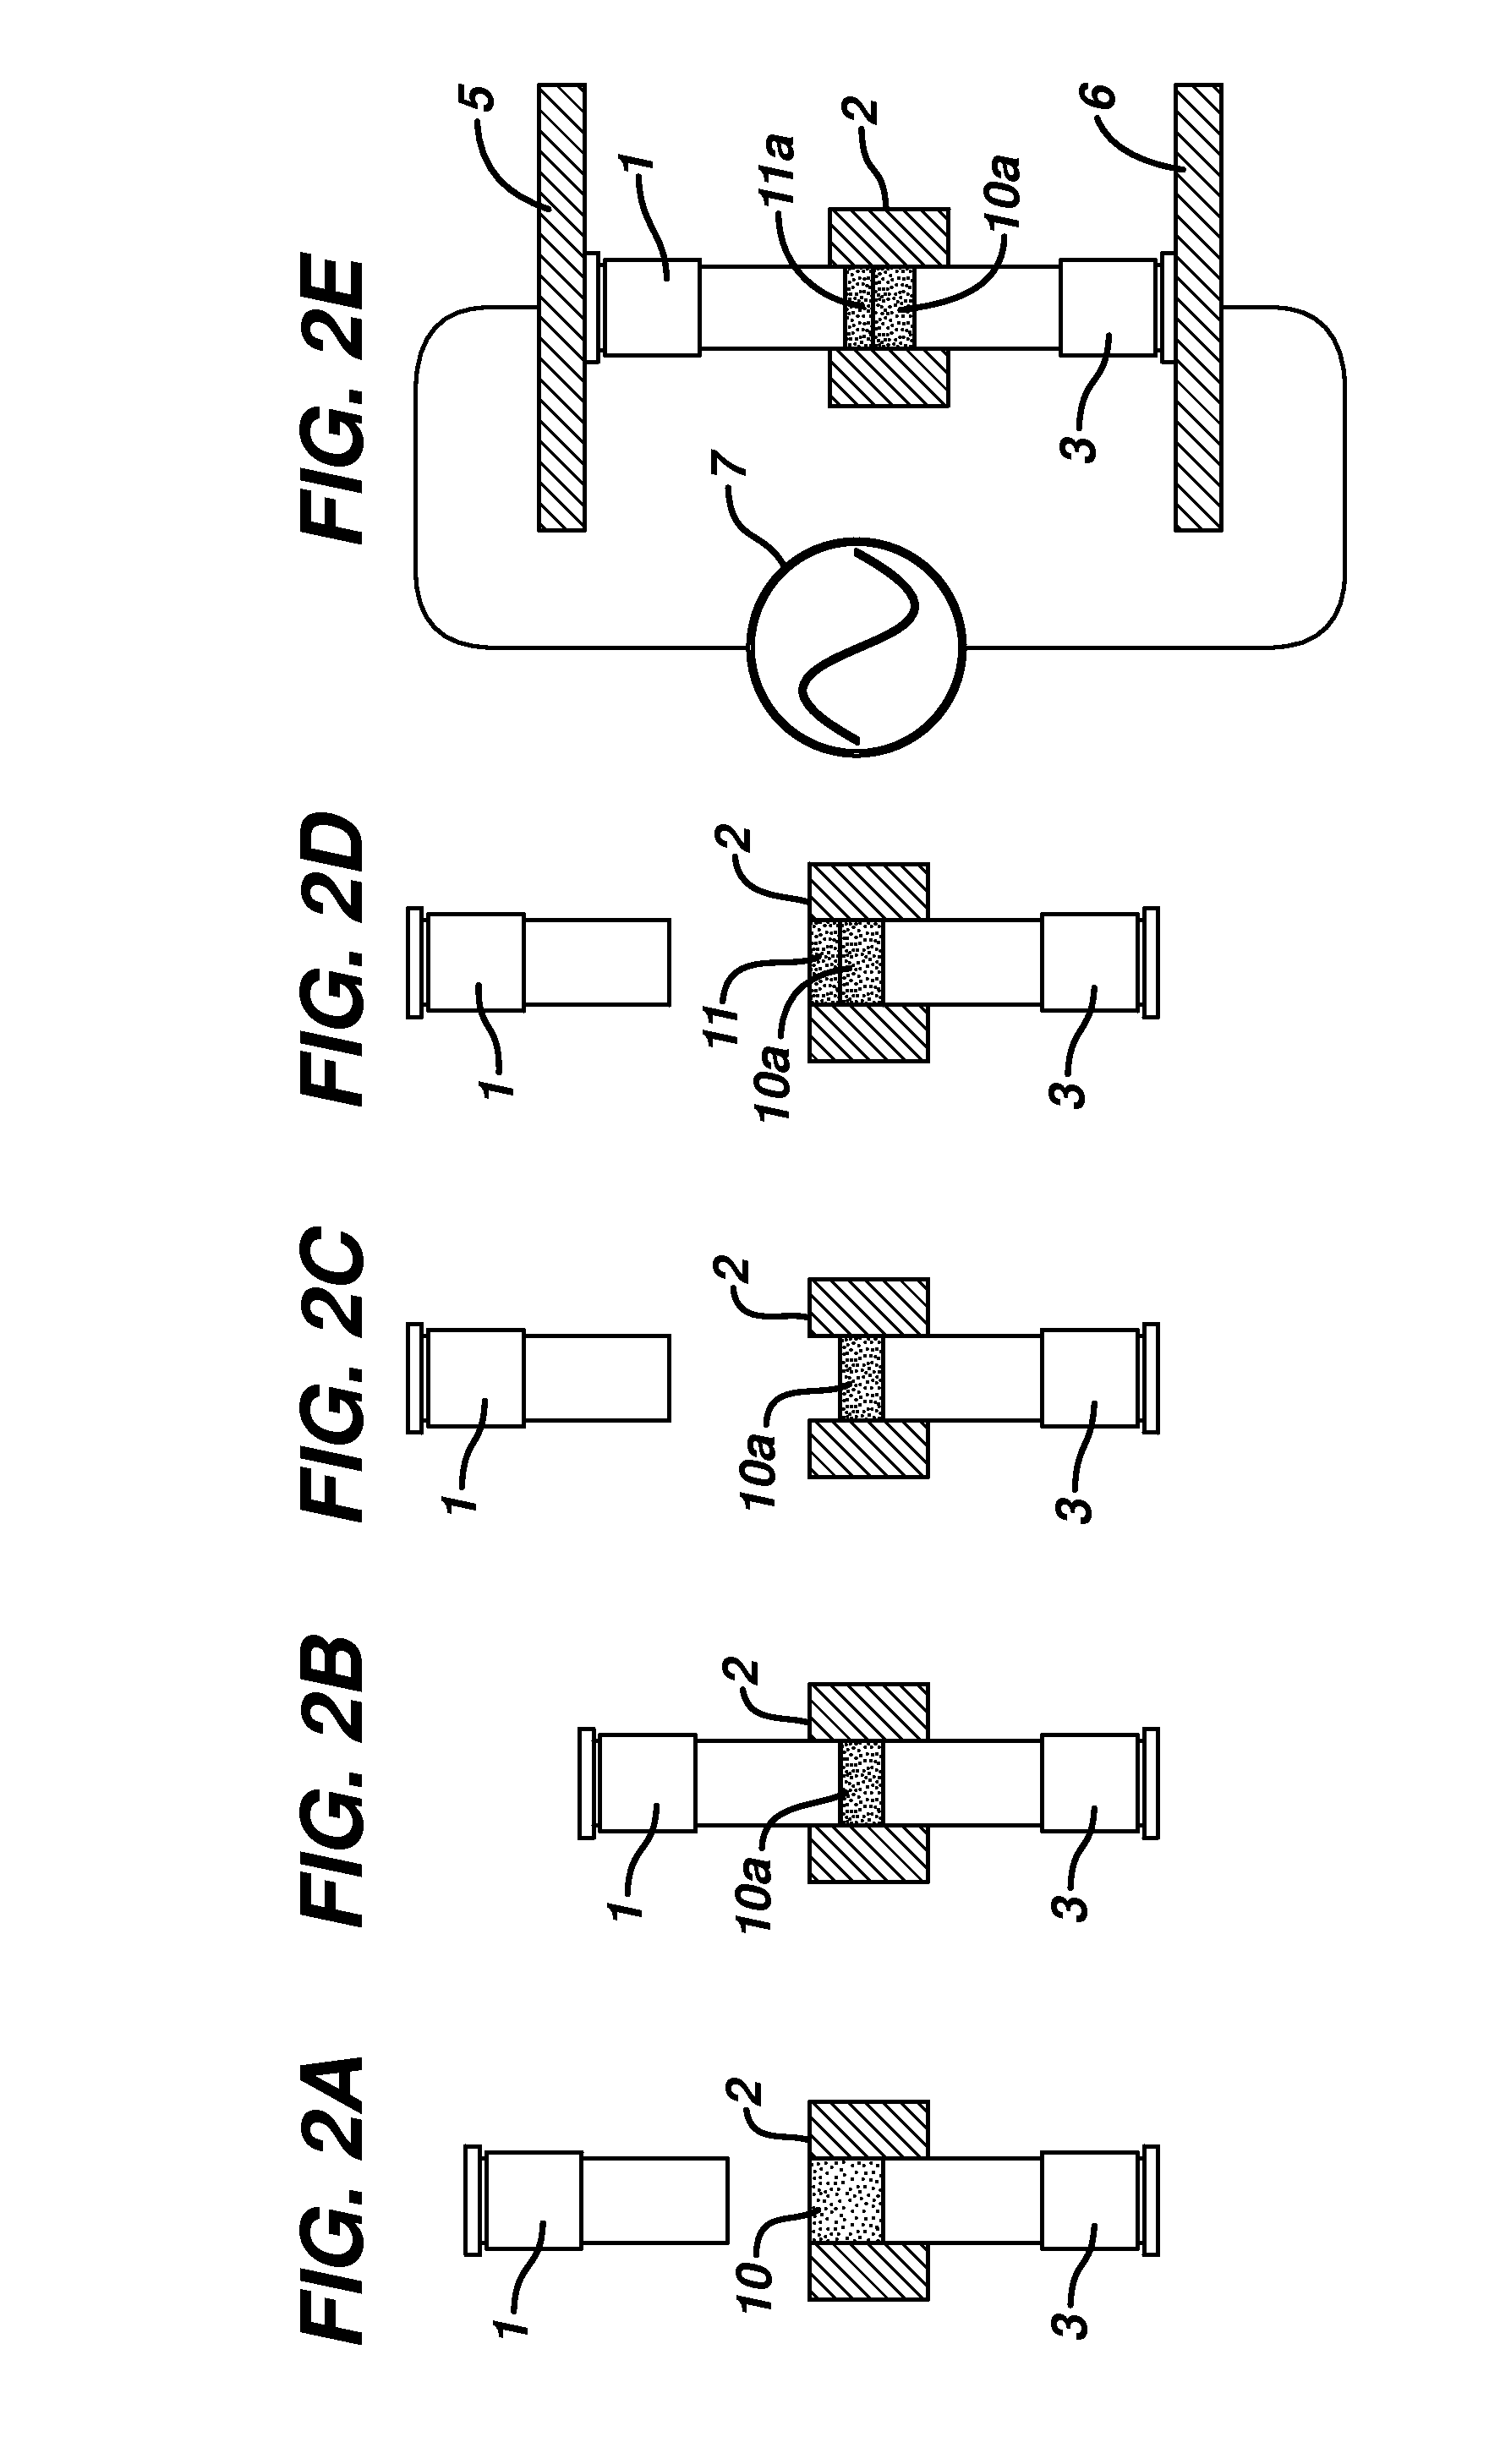 Manufacture of tablet in a die utilizing radiofrequency energy and meltable binder